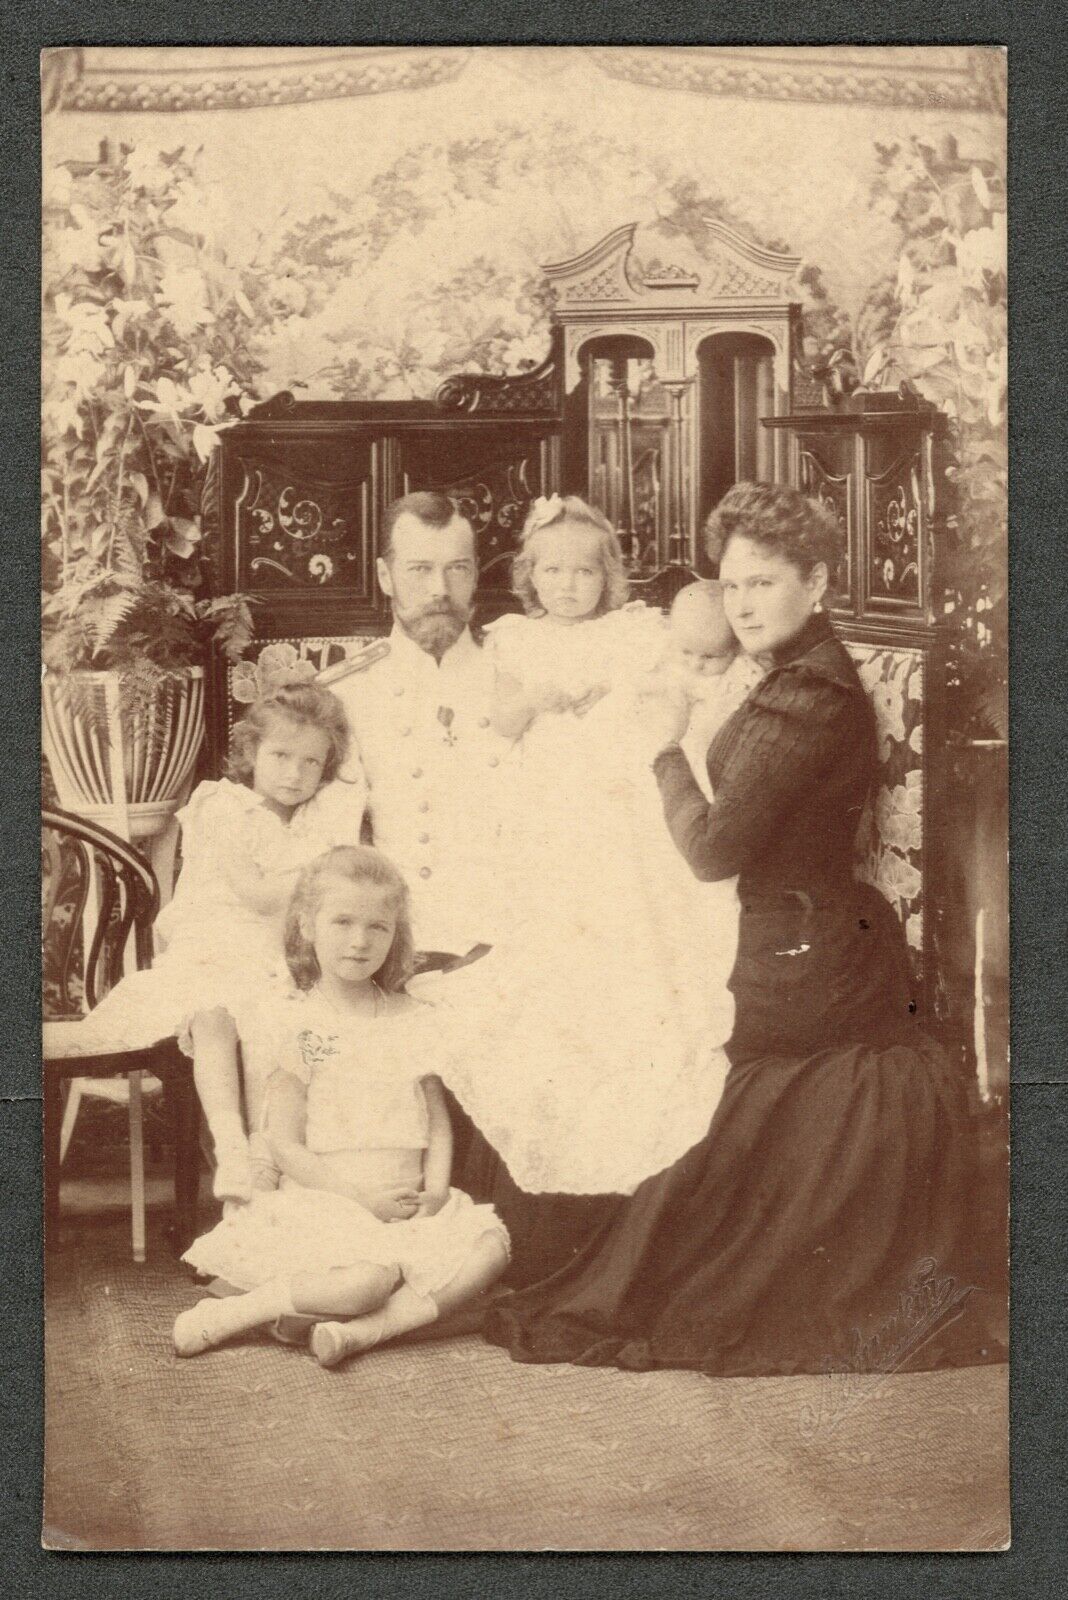 NICHOLAS II with ROMANOV FAMILY Original Cabinet Card • All Slaughtered in 1918